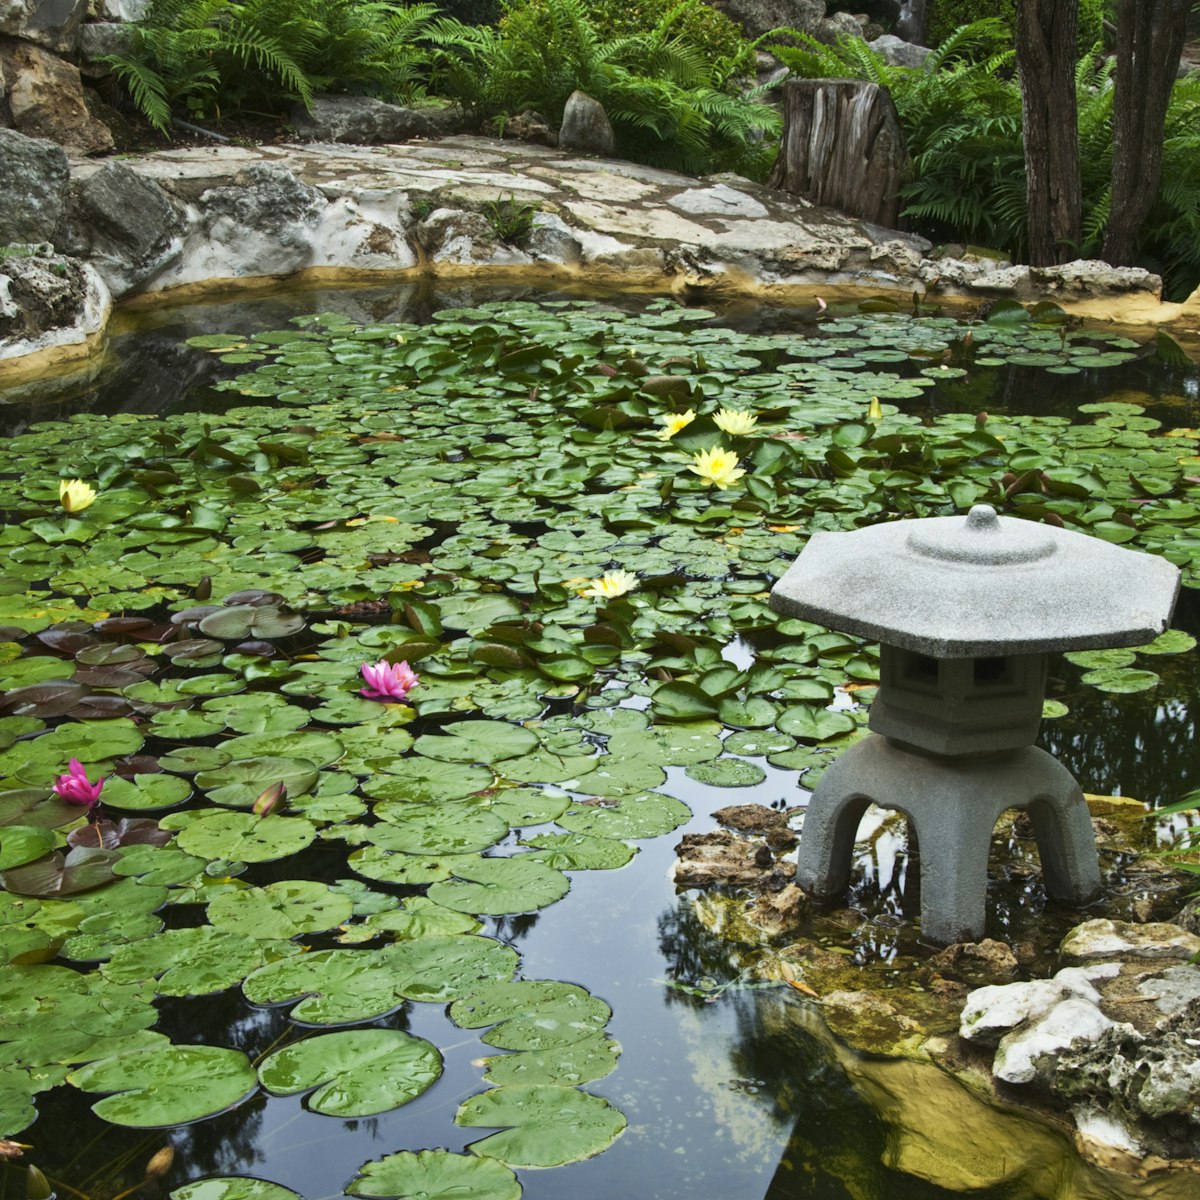 Koi pond  covered with lily pads at Isamu Taniguchi Japanese Garden, located in Zilker Botanical Garden.